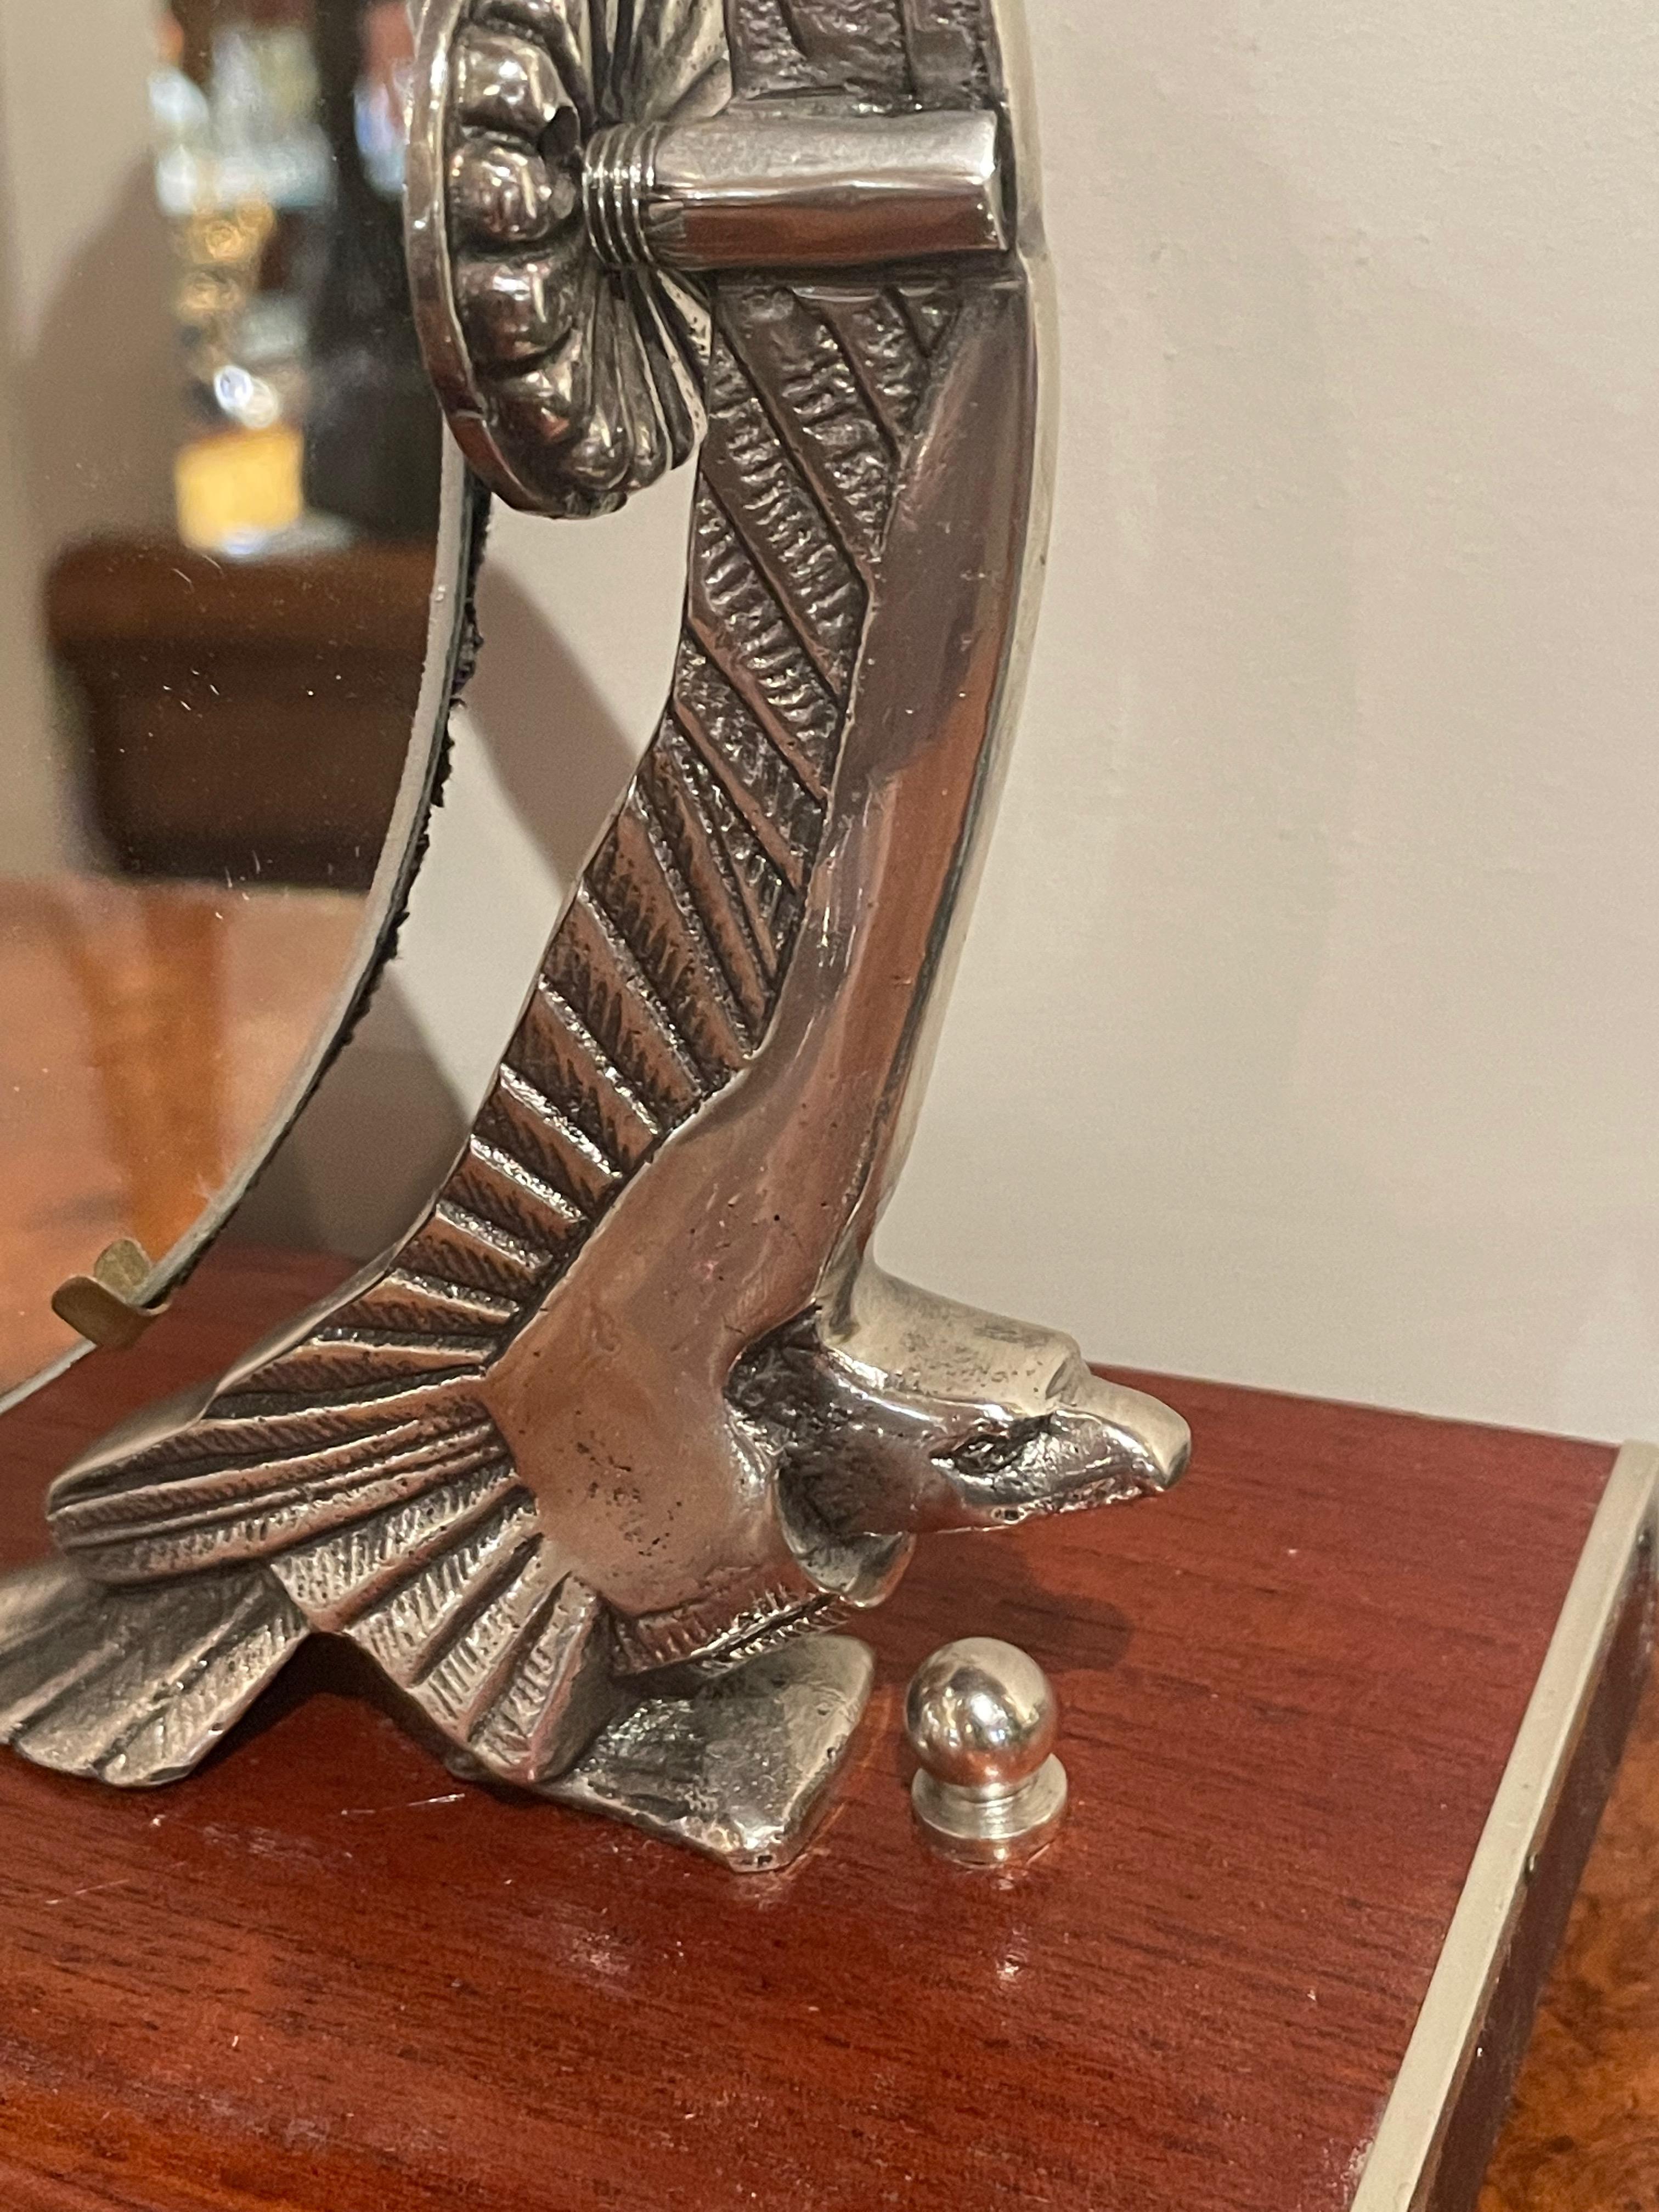 Argentine Art Deco Mirror with Eagle Sculpture Supports on Wooden Base